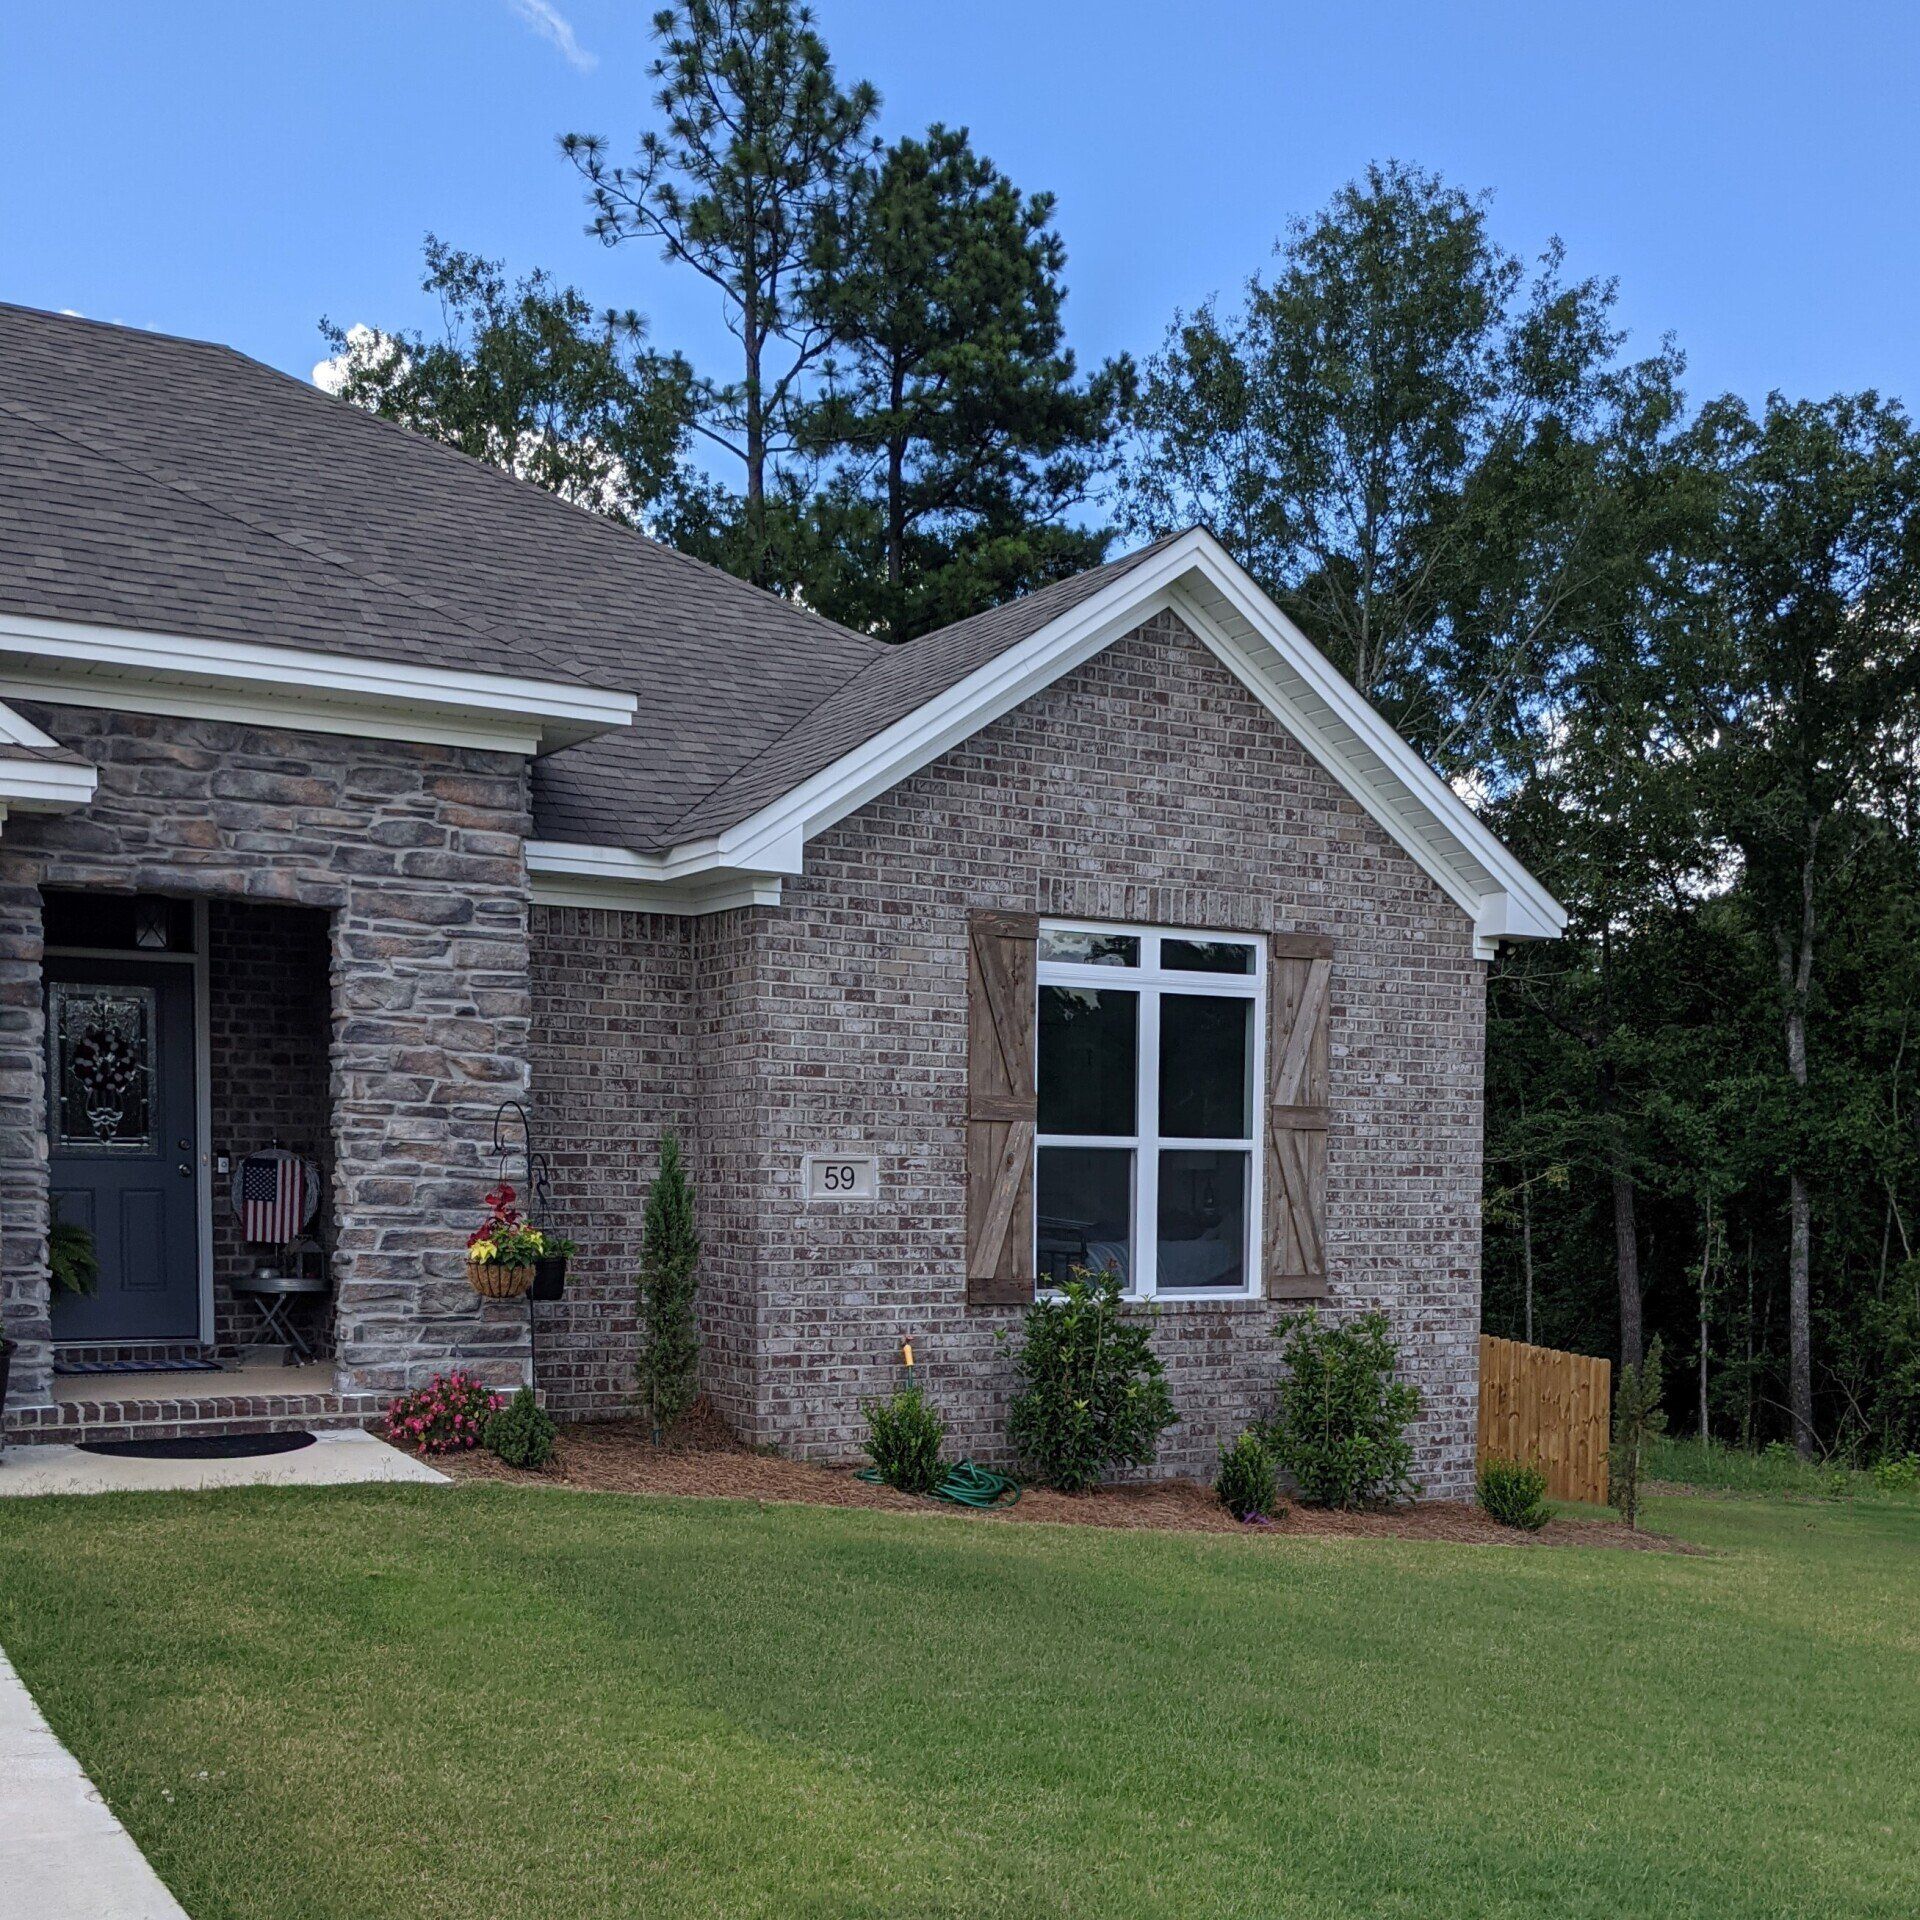 home tint in Wetumpka - Upgraded insulation & unmatched UV & Heat Rejection Gained by SPF Home Tint in Wetumpka, AL